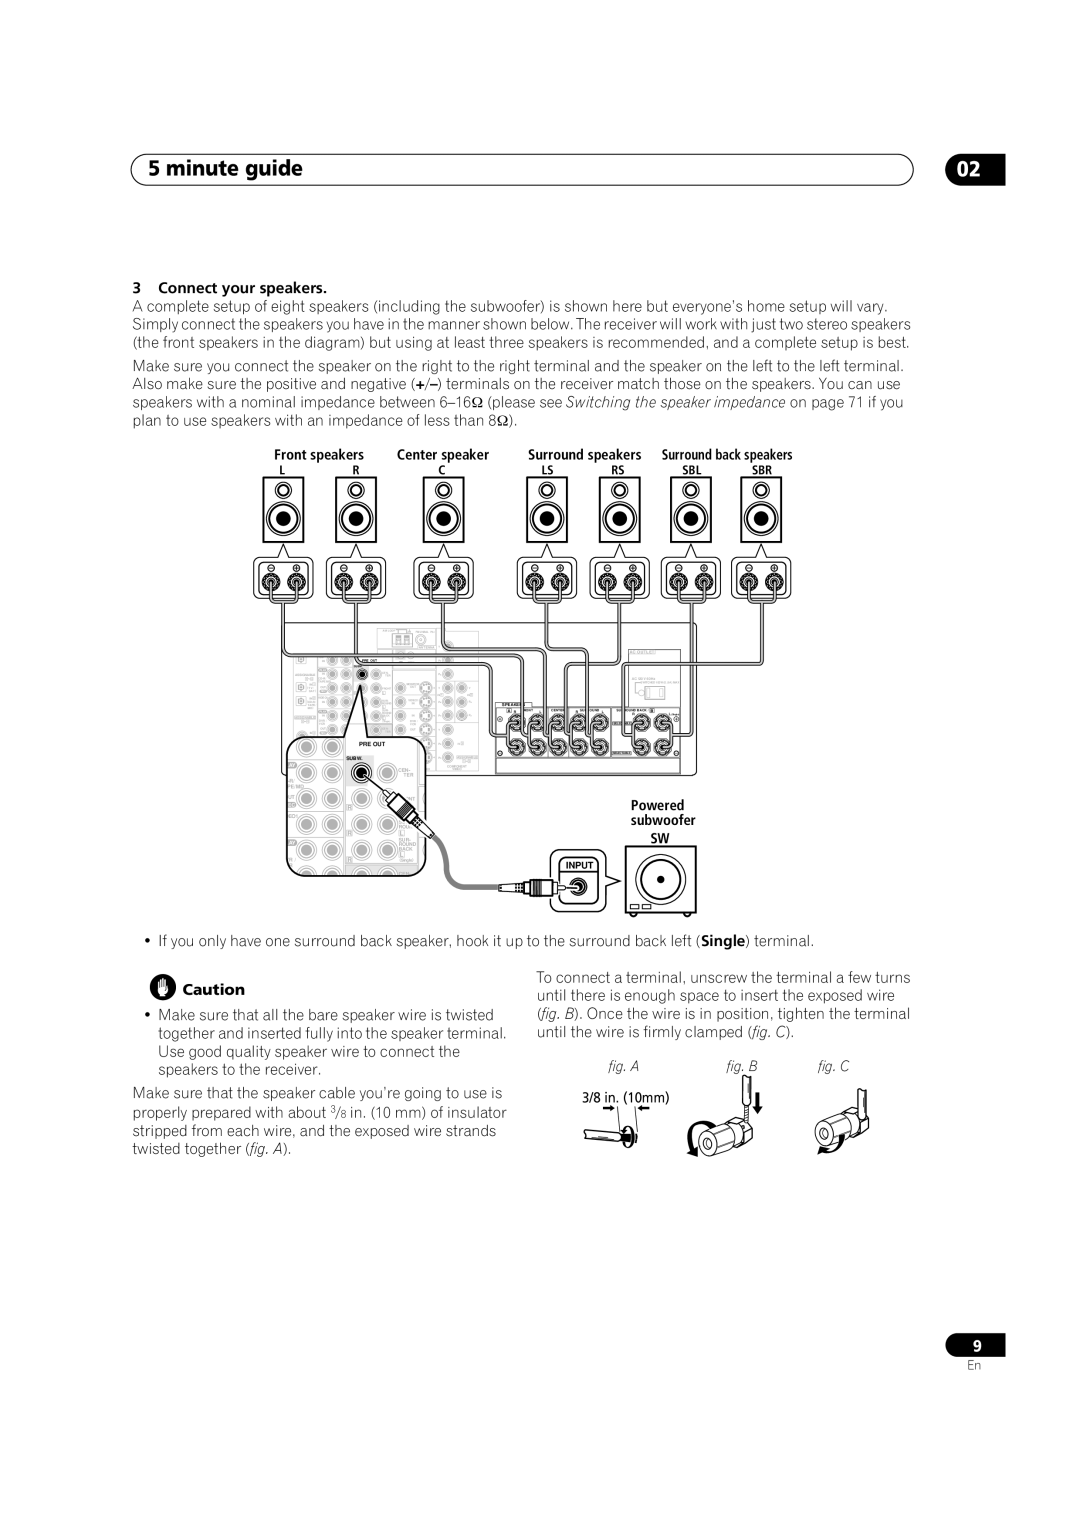 Pioneer VSX-1015TX operating instructions minute guide, fig. A, fig. B, Connect your speakers 